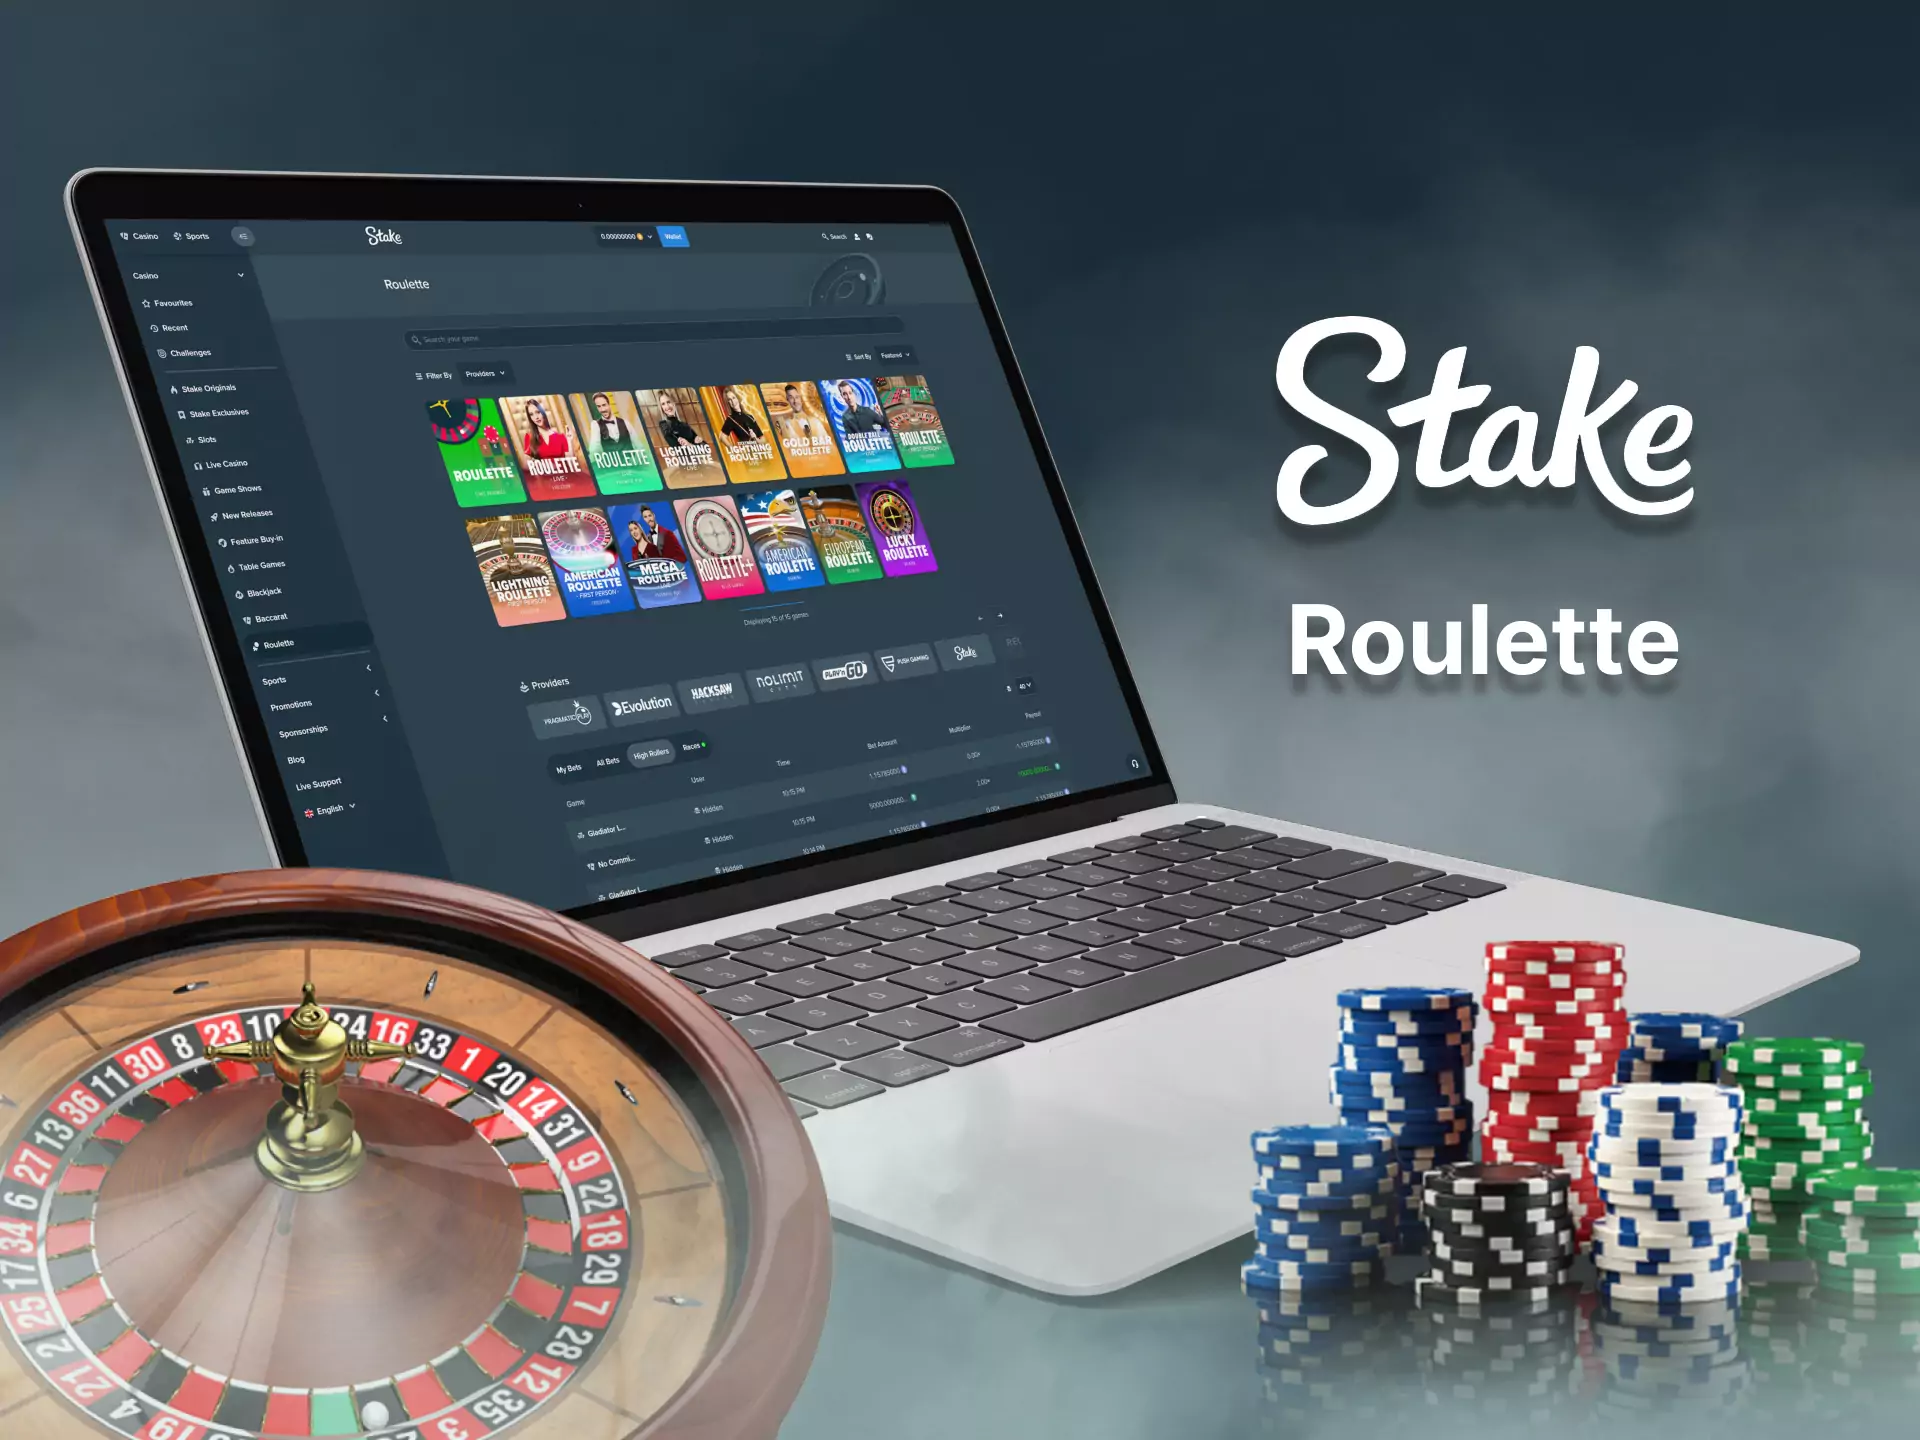 In the Stake Casino, you can play roulette.